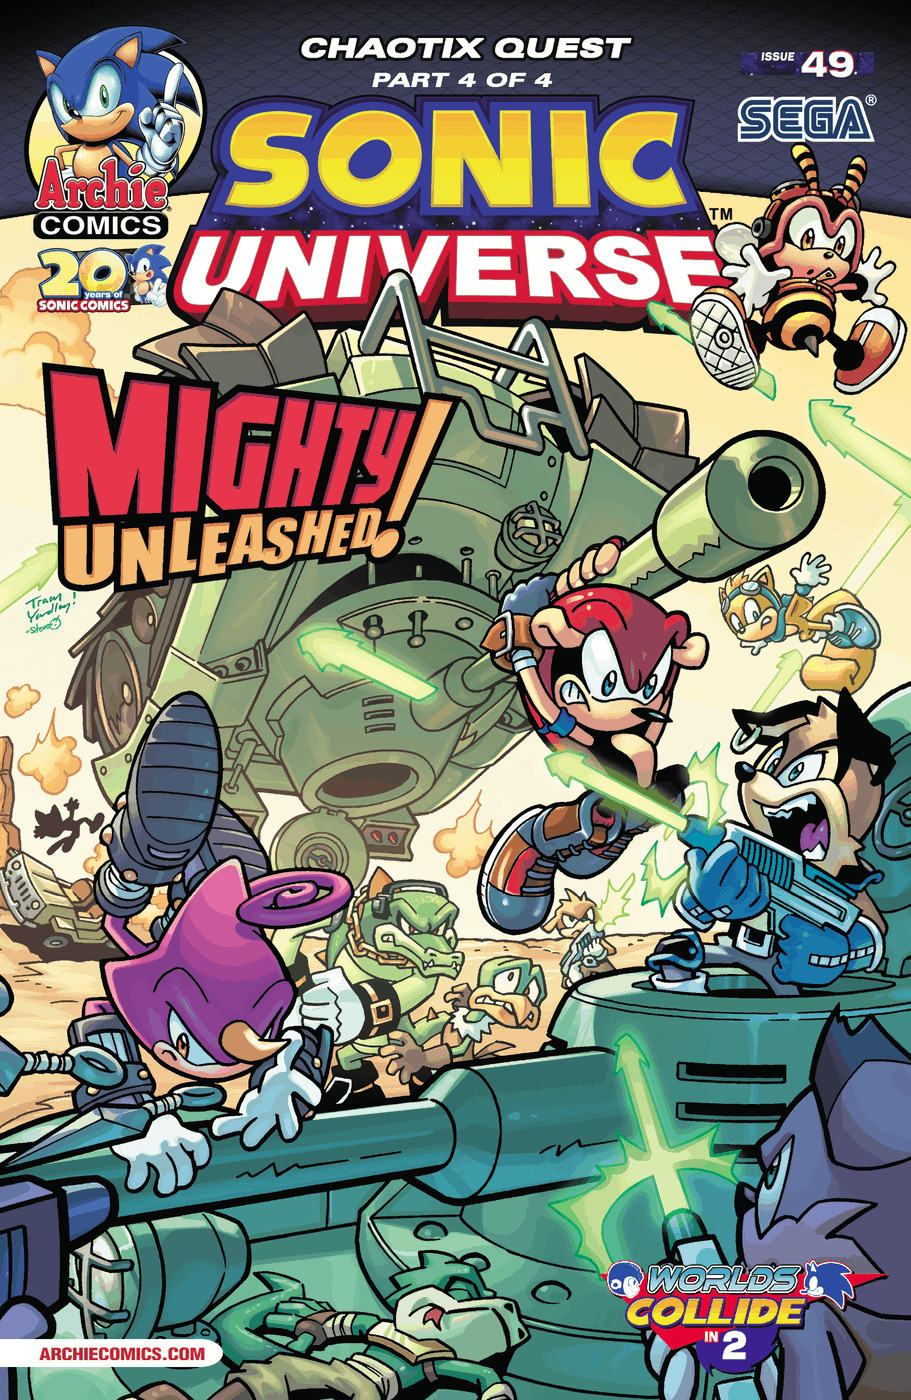 SONIC UNIVERSE Comic #47 February 2013 CHAOTIX QUEST 2 of 4 Bagged